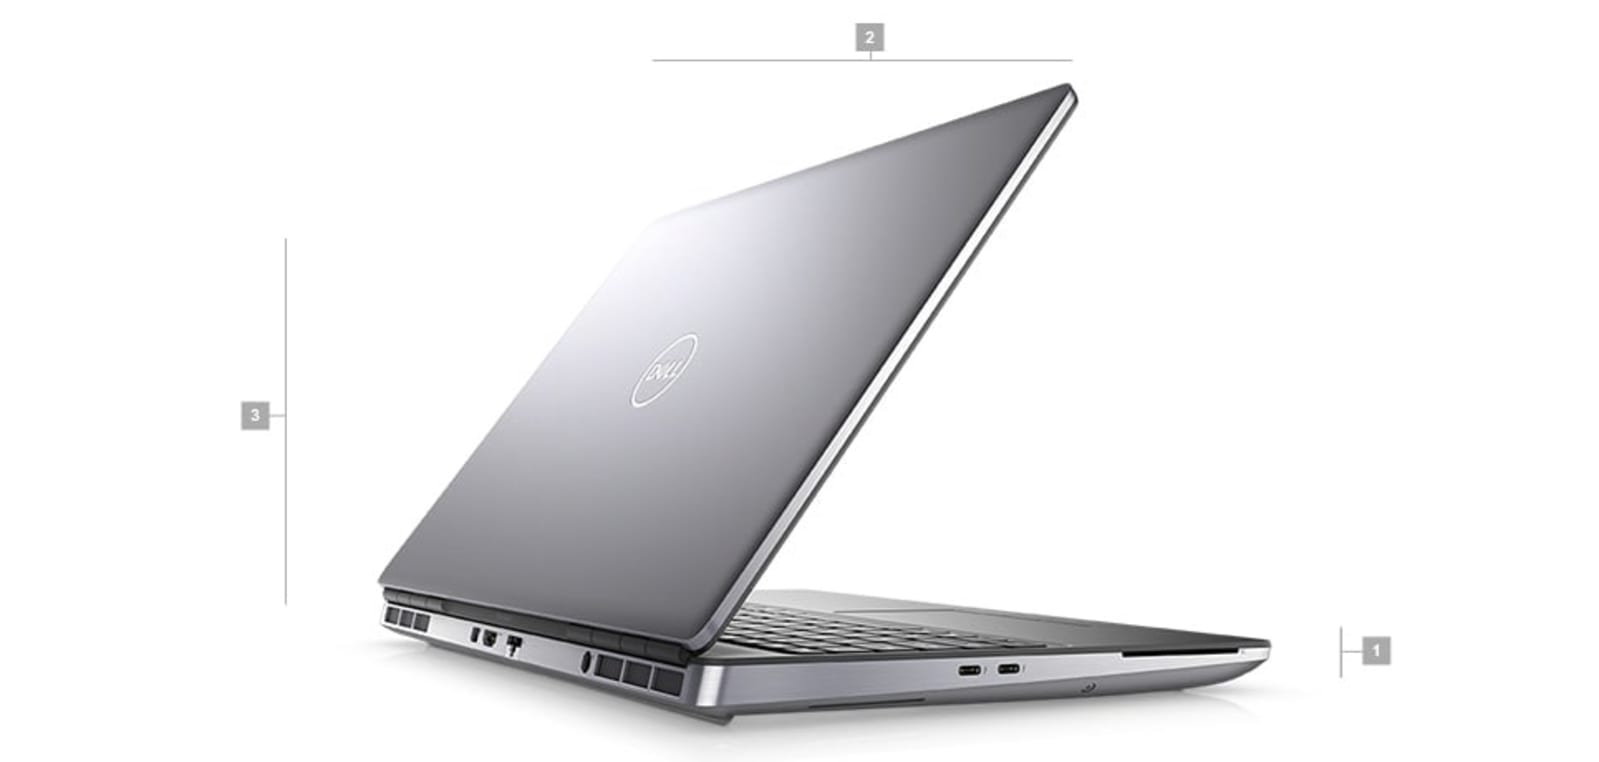 Restored Dell Precision 7000 7560 Workstation Laptop (2021) | 15.6" FHD Touch | Core i5 - 256GB SSD + 256GB SSD - 8GB RAM | 6 Cores @ 4.6 GHz - 11th Gen CPU (Refurbished) - image 2 of 11